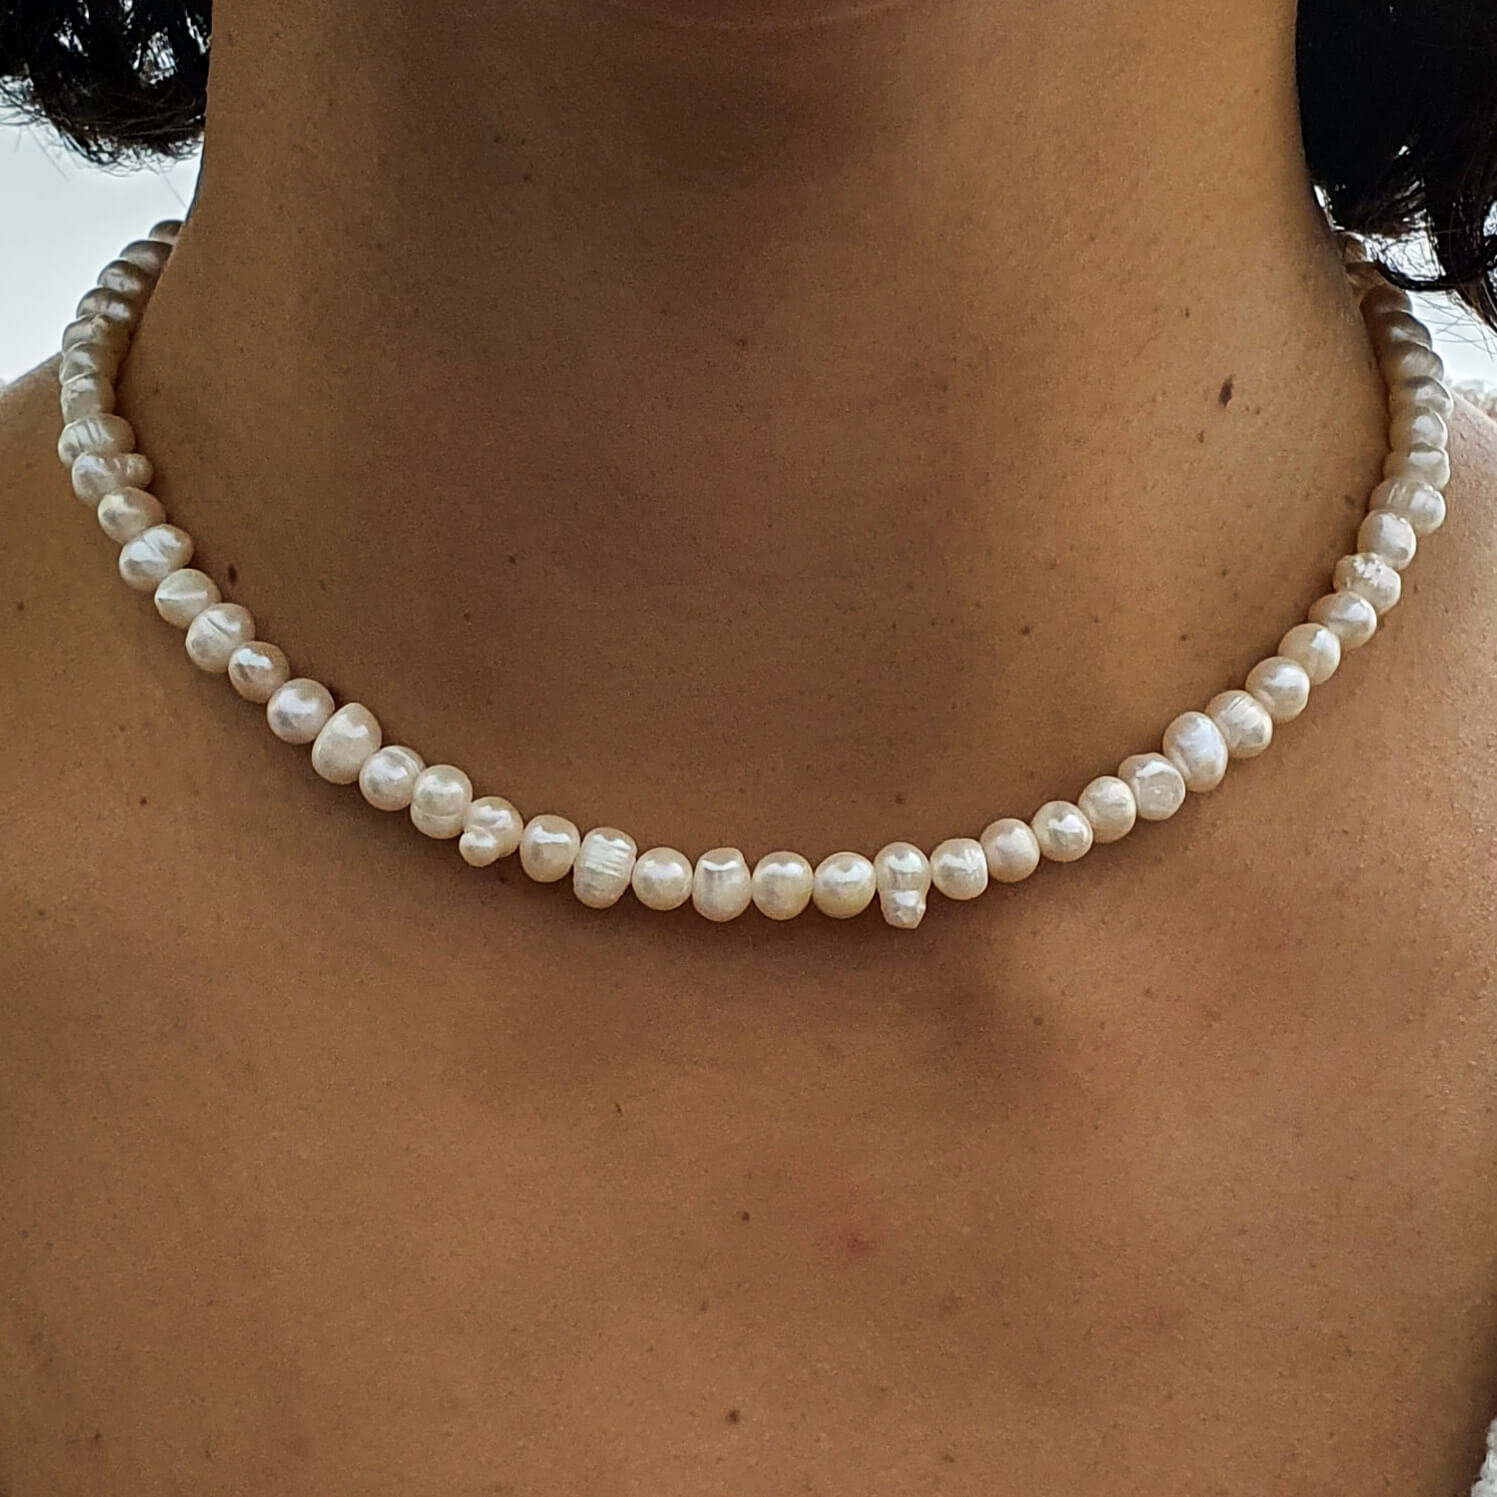 Pearl Necklace for Men Round White Pearl Necklace for Women Mens Pearl  Necklace Pearl Necklace Choker Jewelry Gift for Women (16inch(6mm), white)